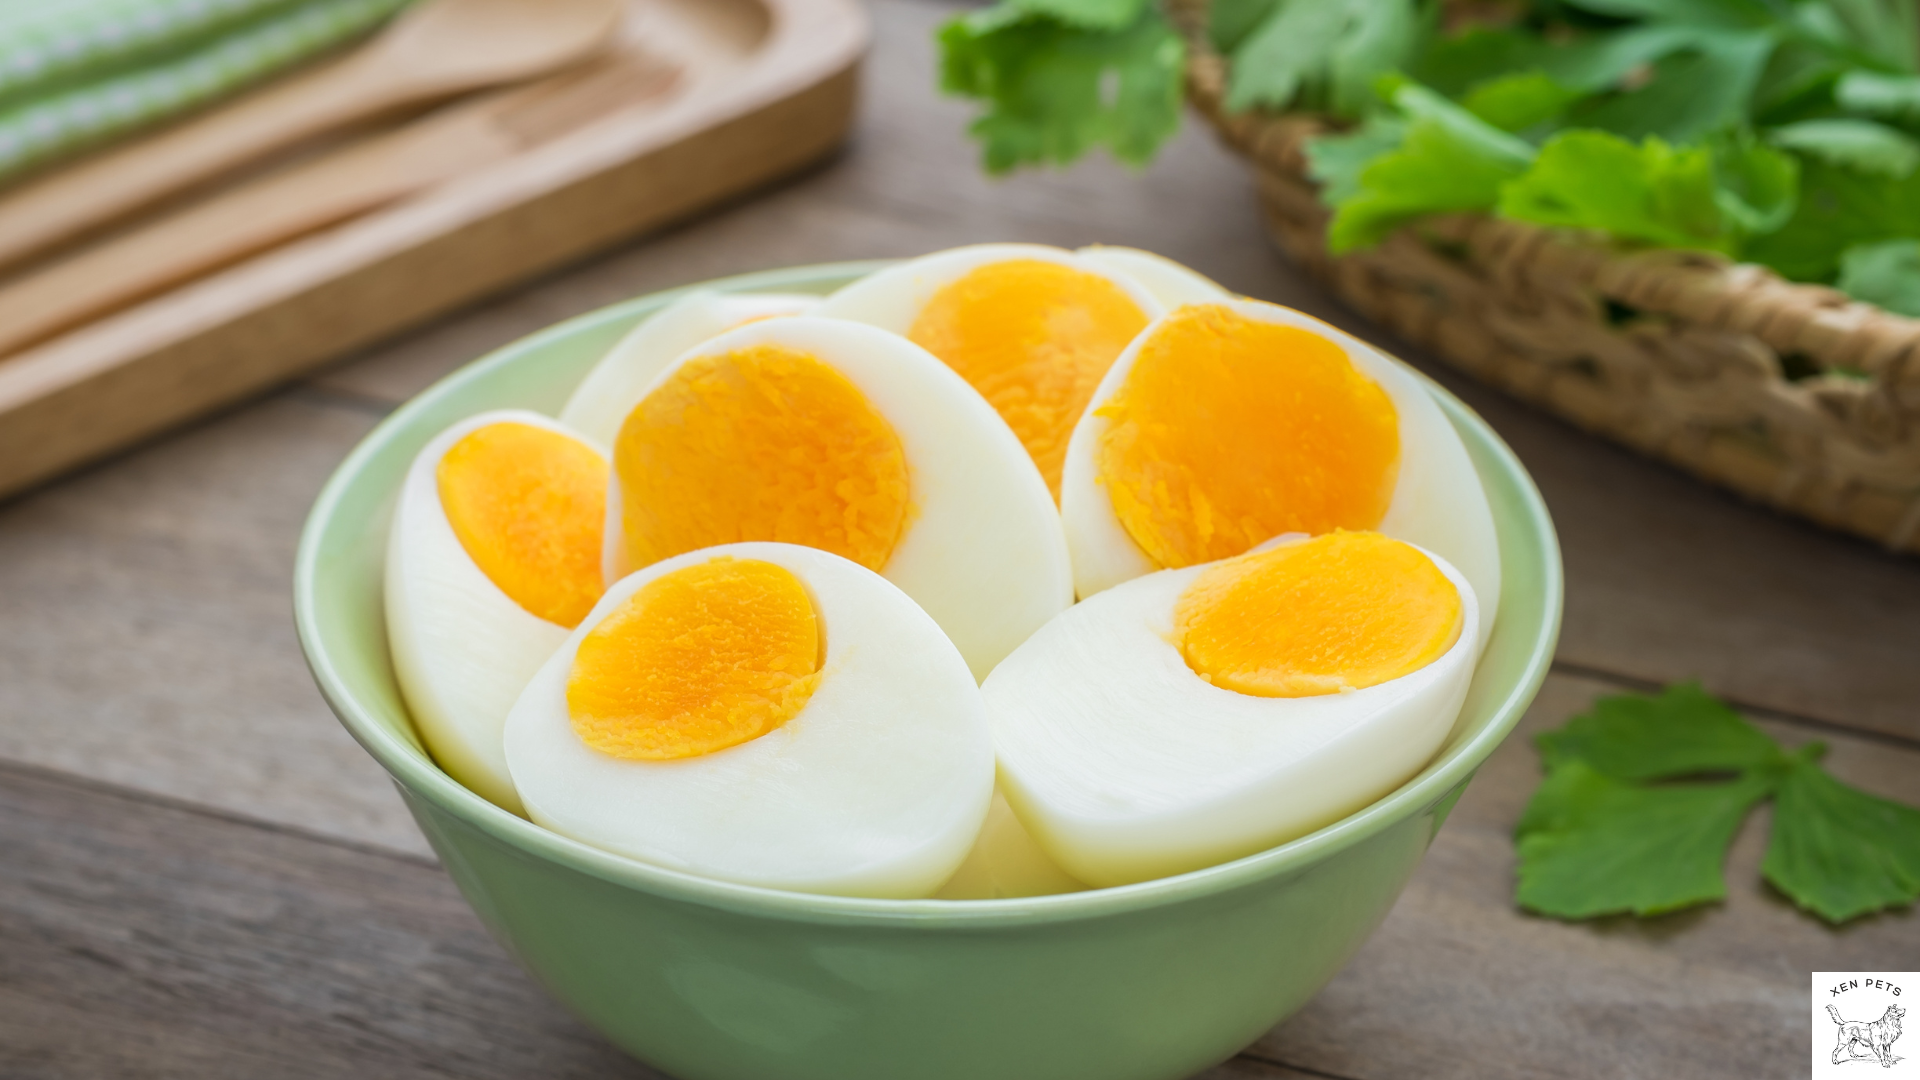 Eggs are a great source of Vitamin D